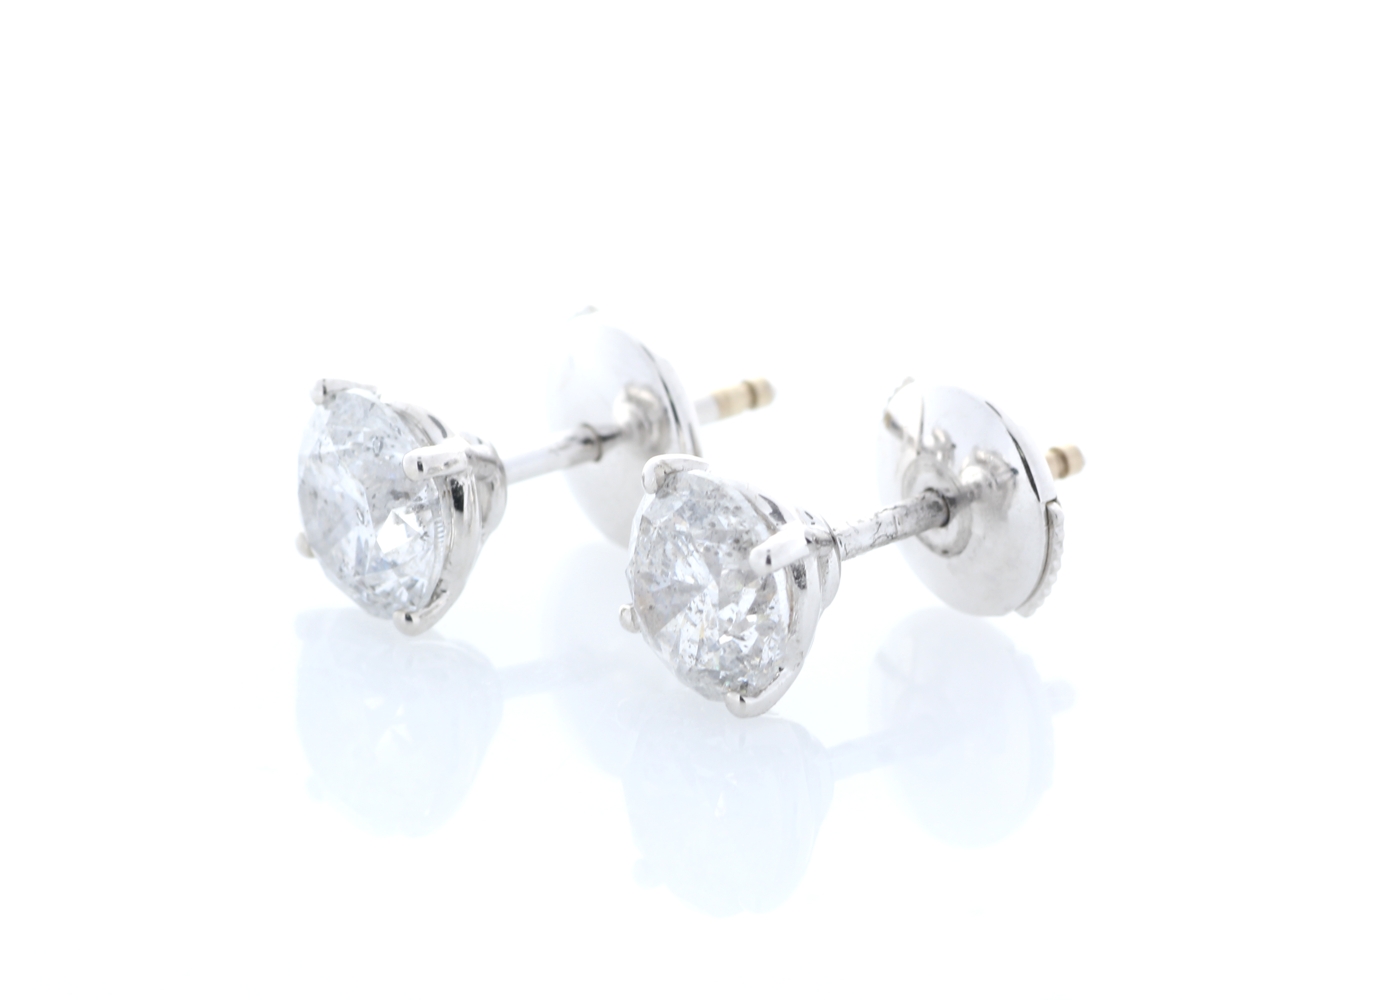 18ct White Gold Claw Set Diamond Earrings 2.36 Carats - Image 3 of 4